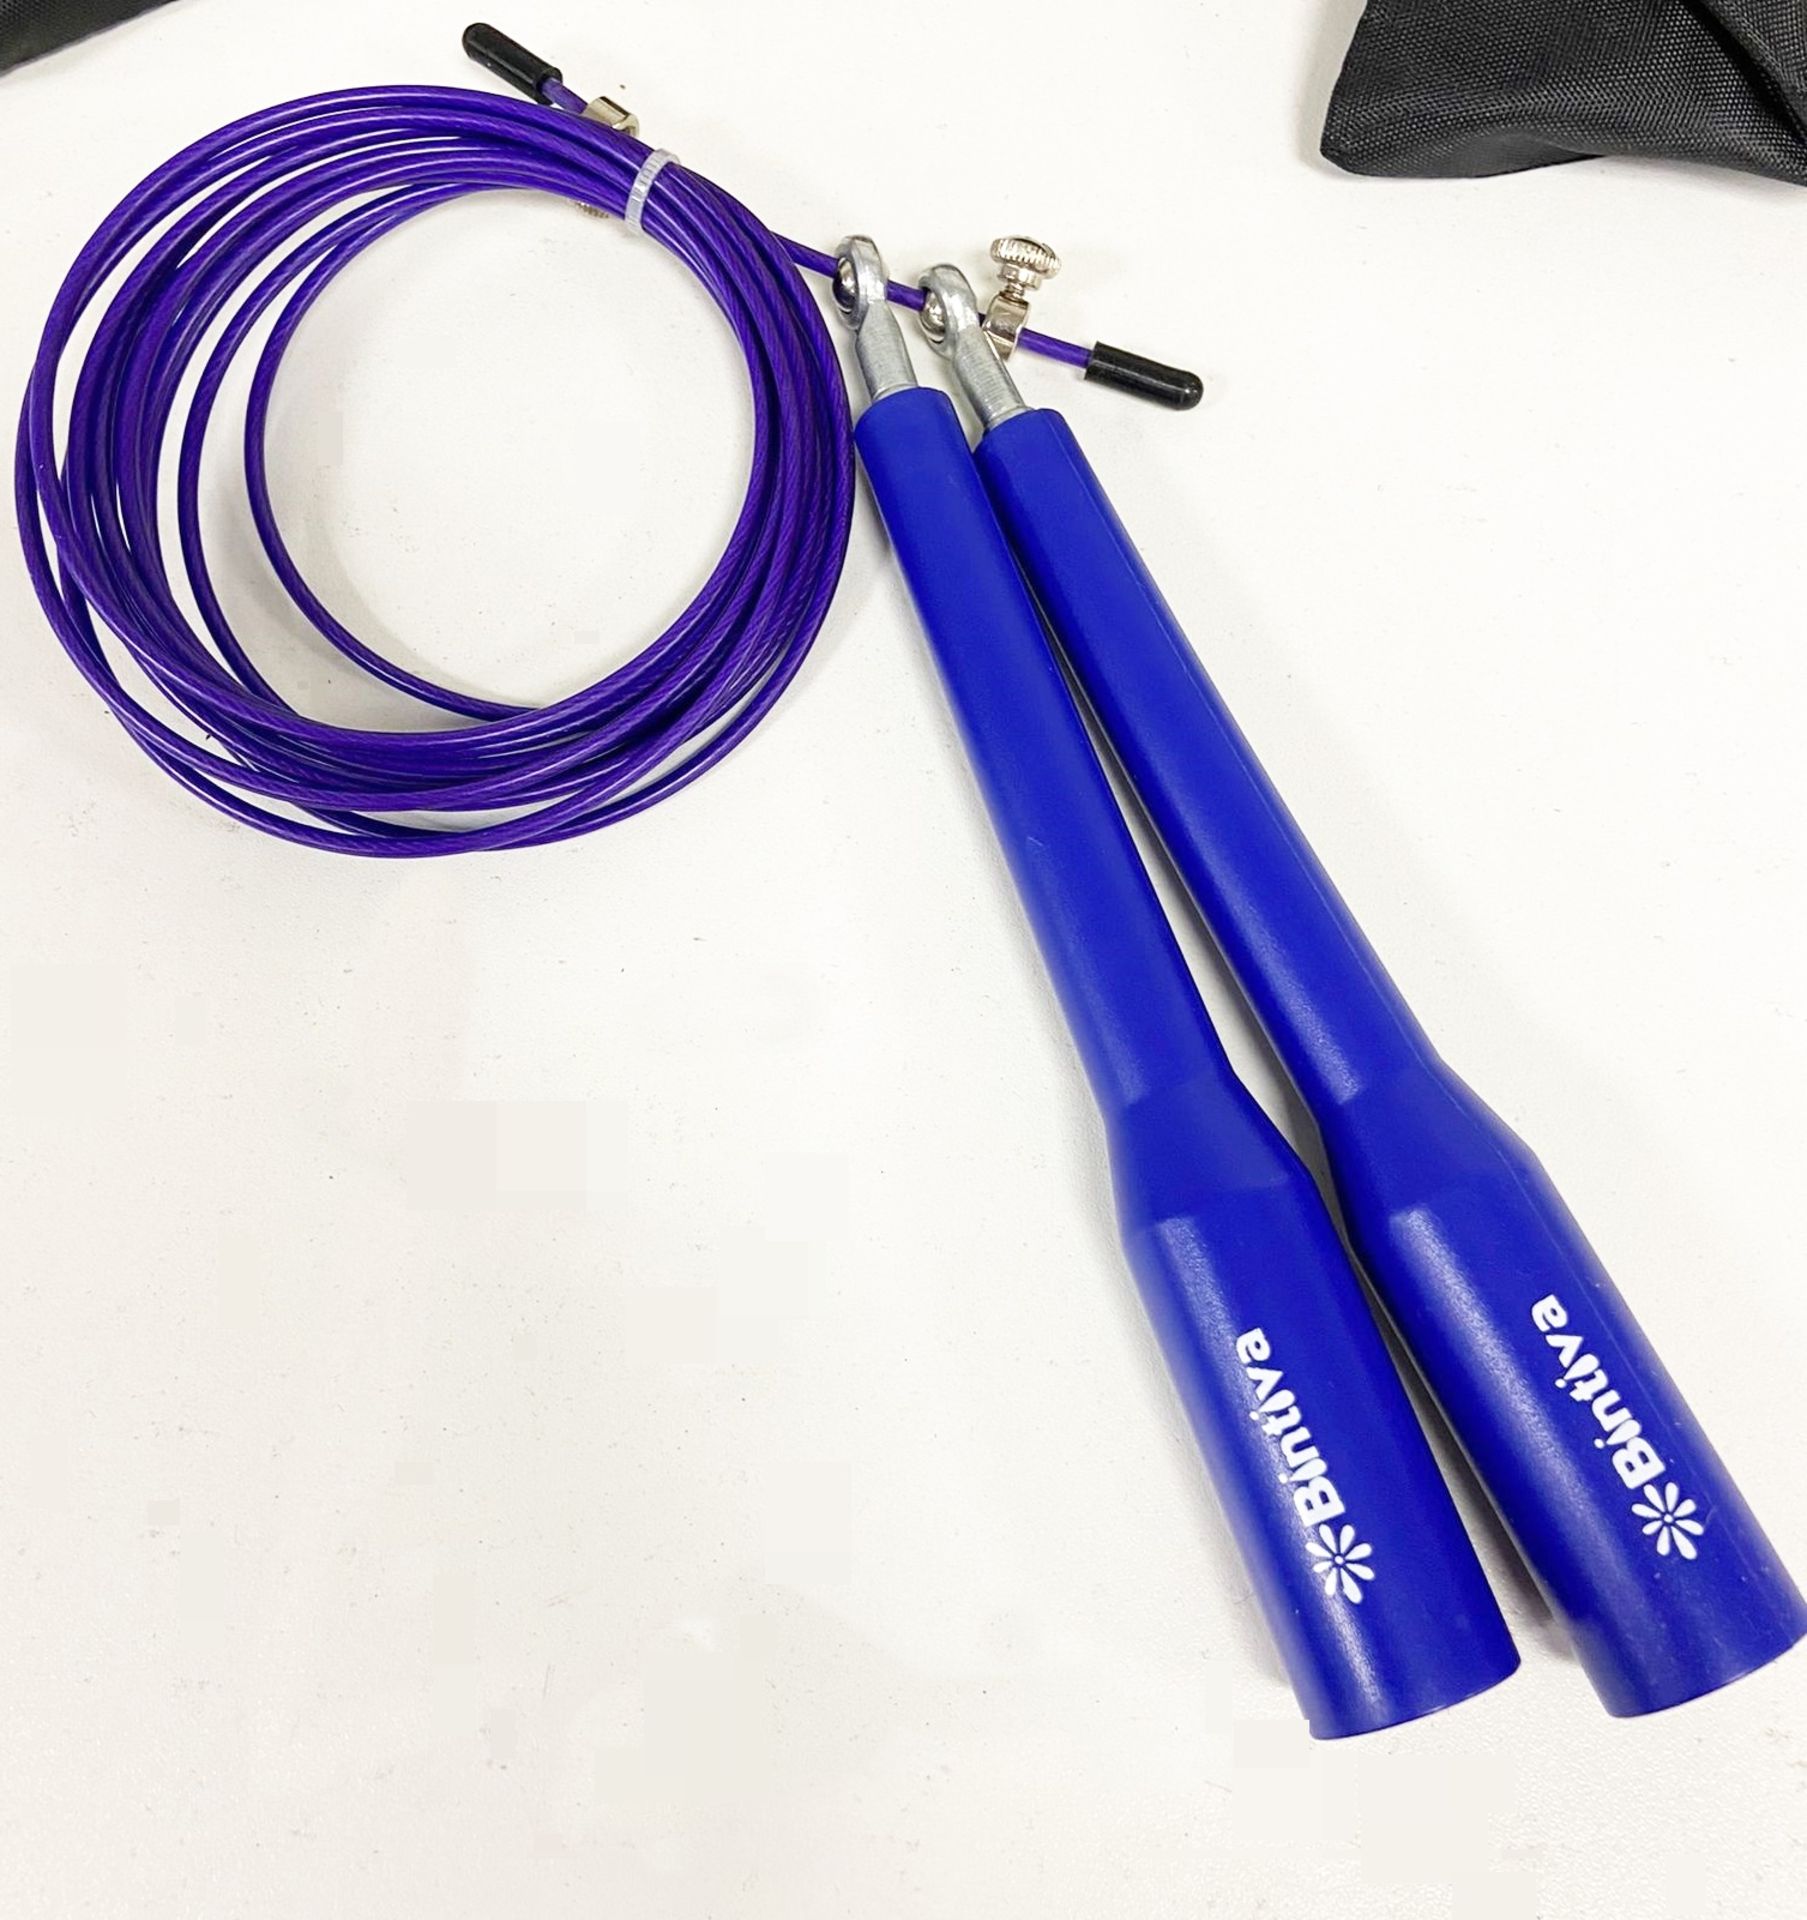 20 x Bintiva Metal Ball Bearings Cable Jump Ropes And Carrying Case 10ft Length - Image 3 of 3